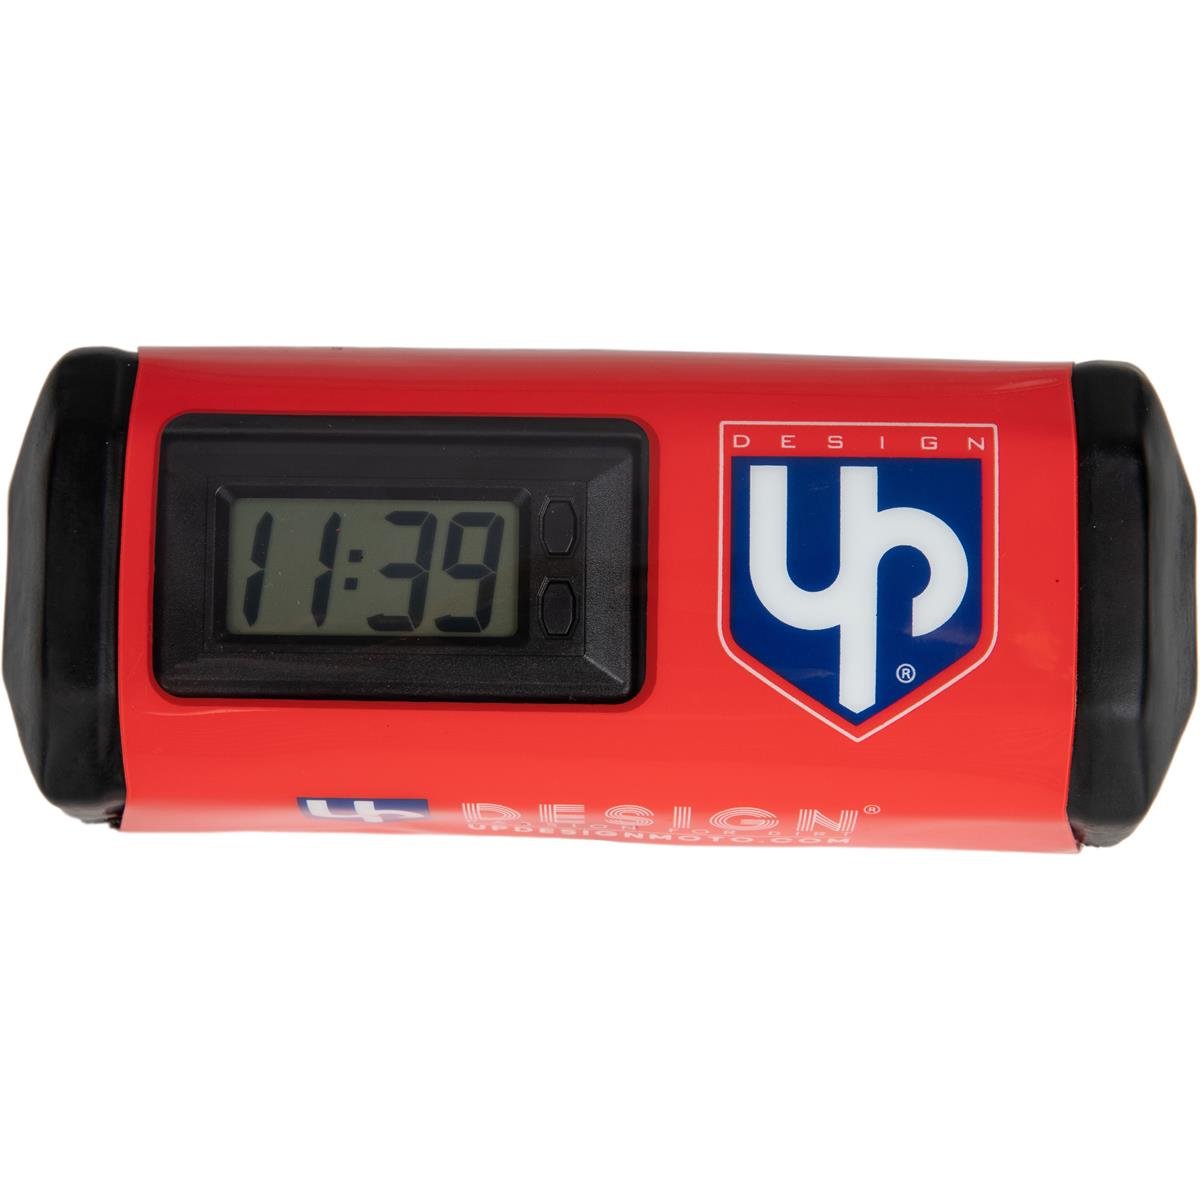 UPDESIGN Bar Pad Motocross Red, with clock